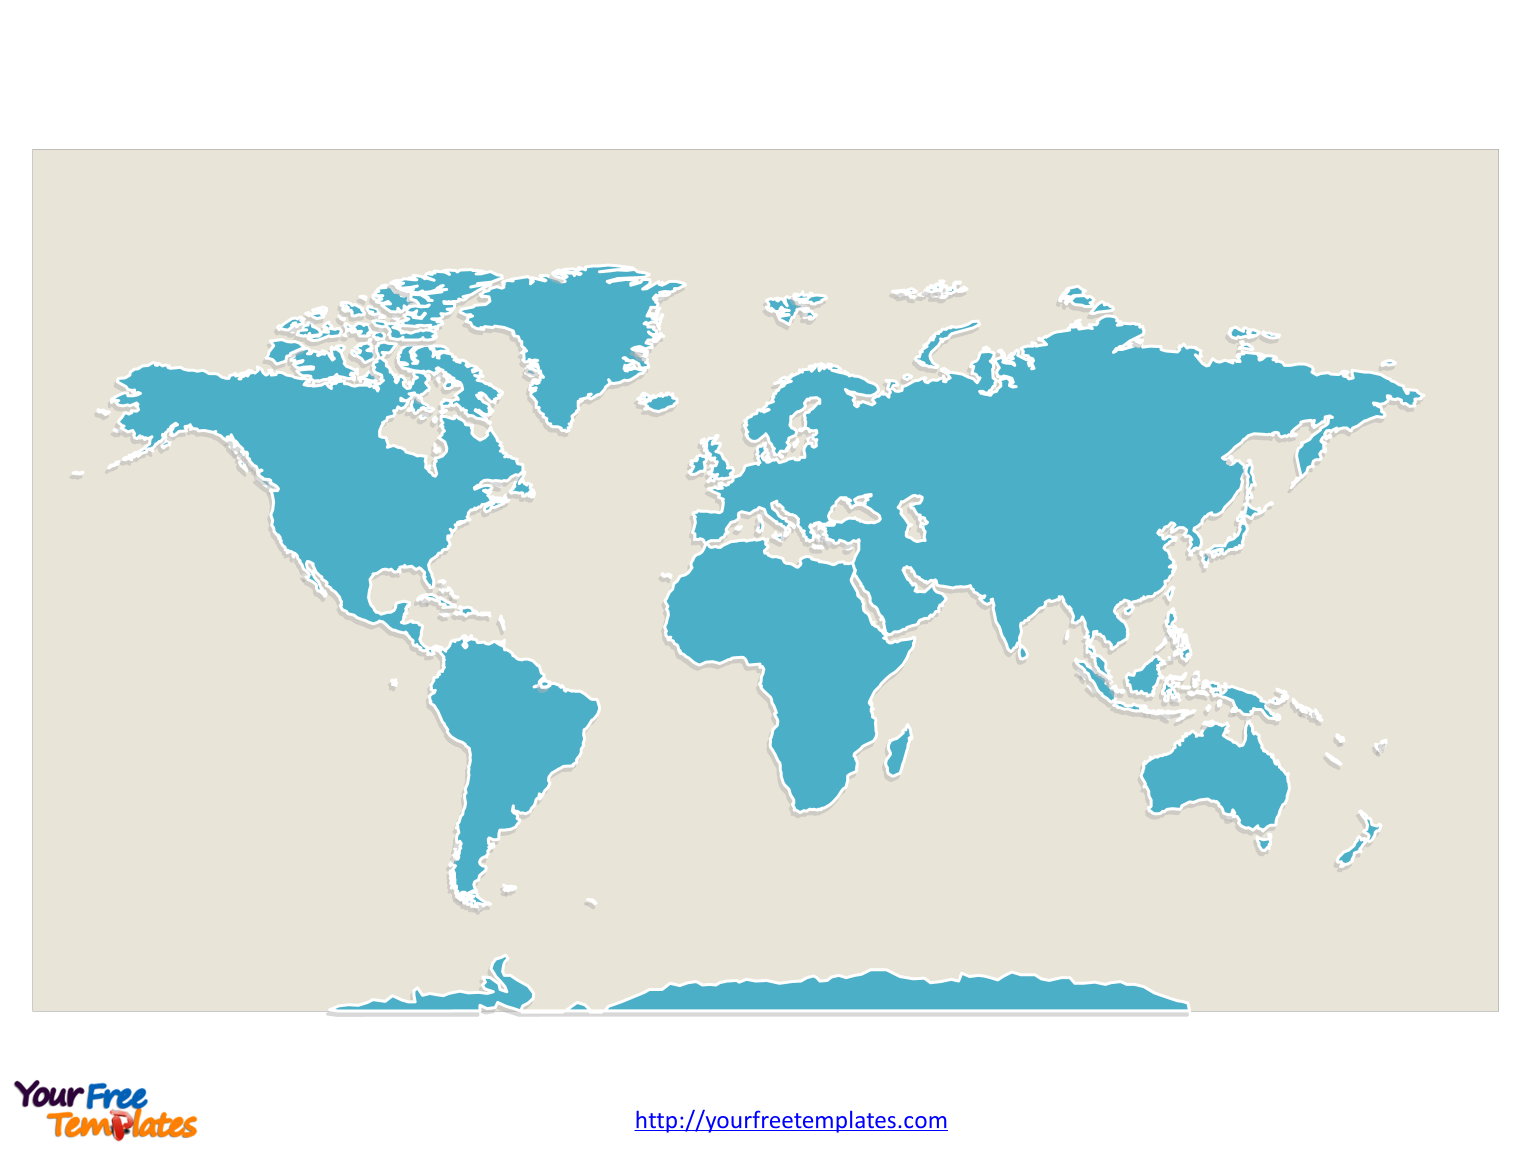 World map with continents as a whole or blank continent map printable